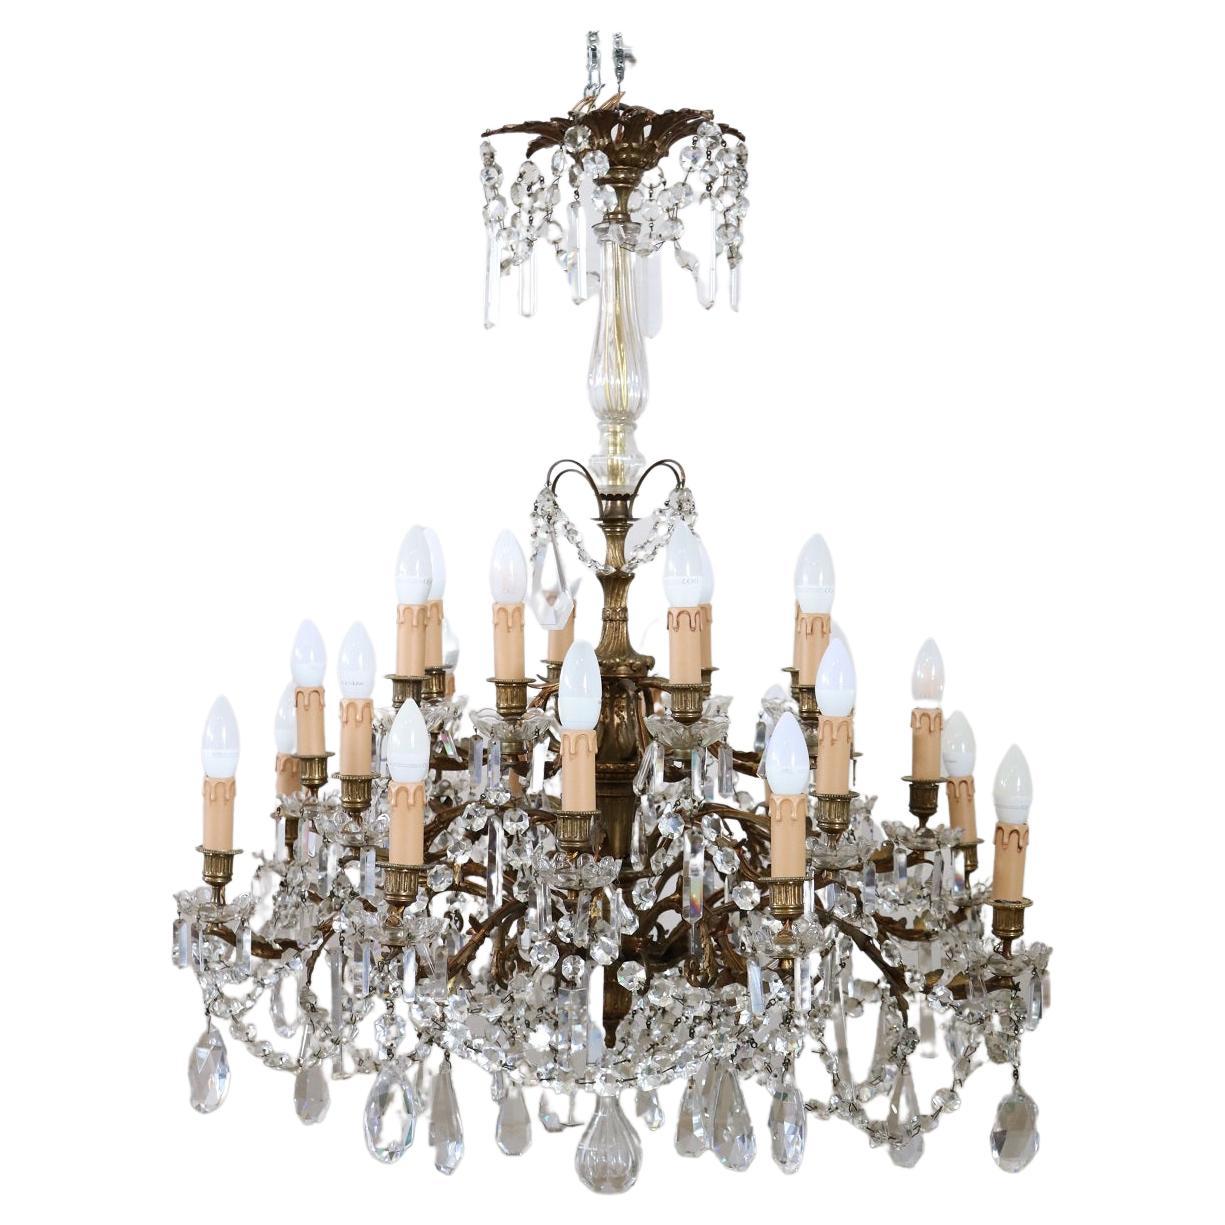 Early 20th Century Italian Gilded Bronze and Crystal Large Chandelier, 24 Bulbs For Sale